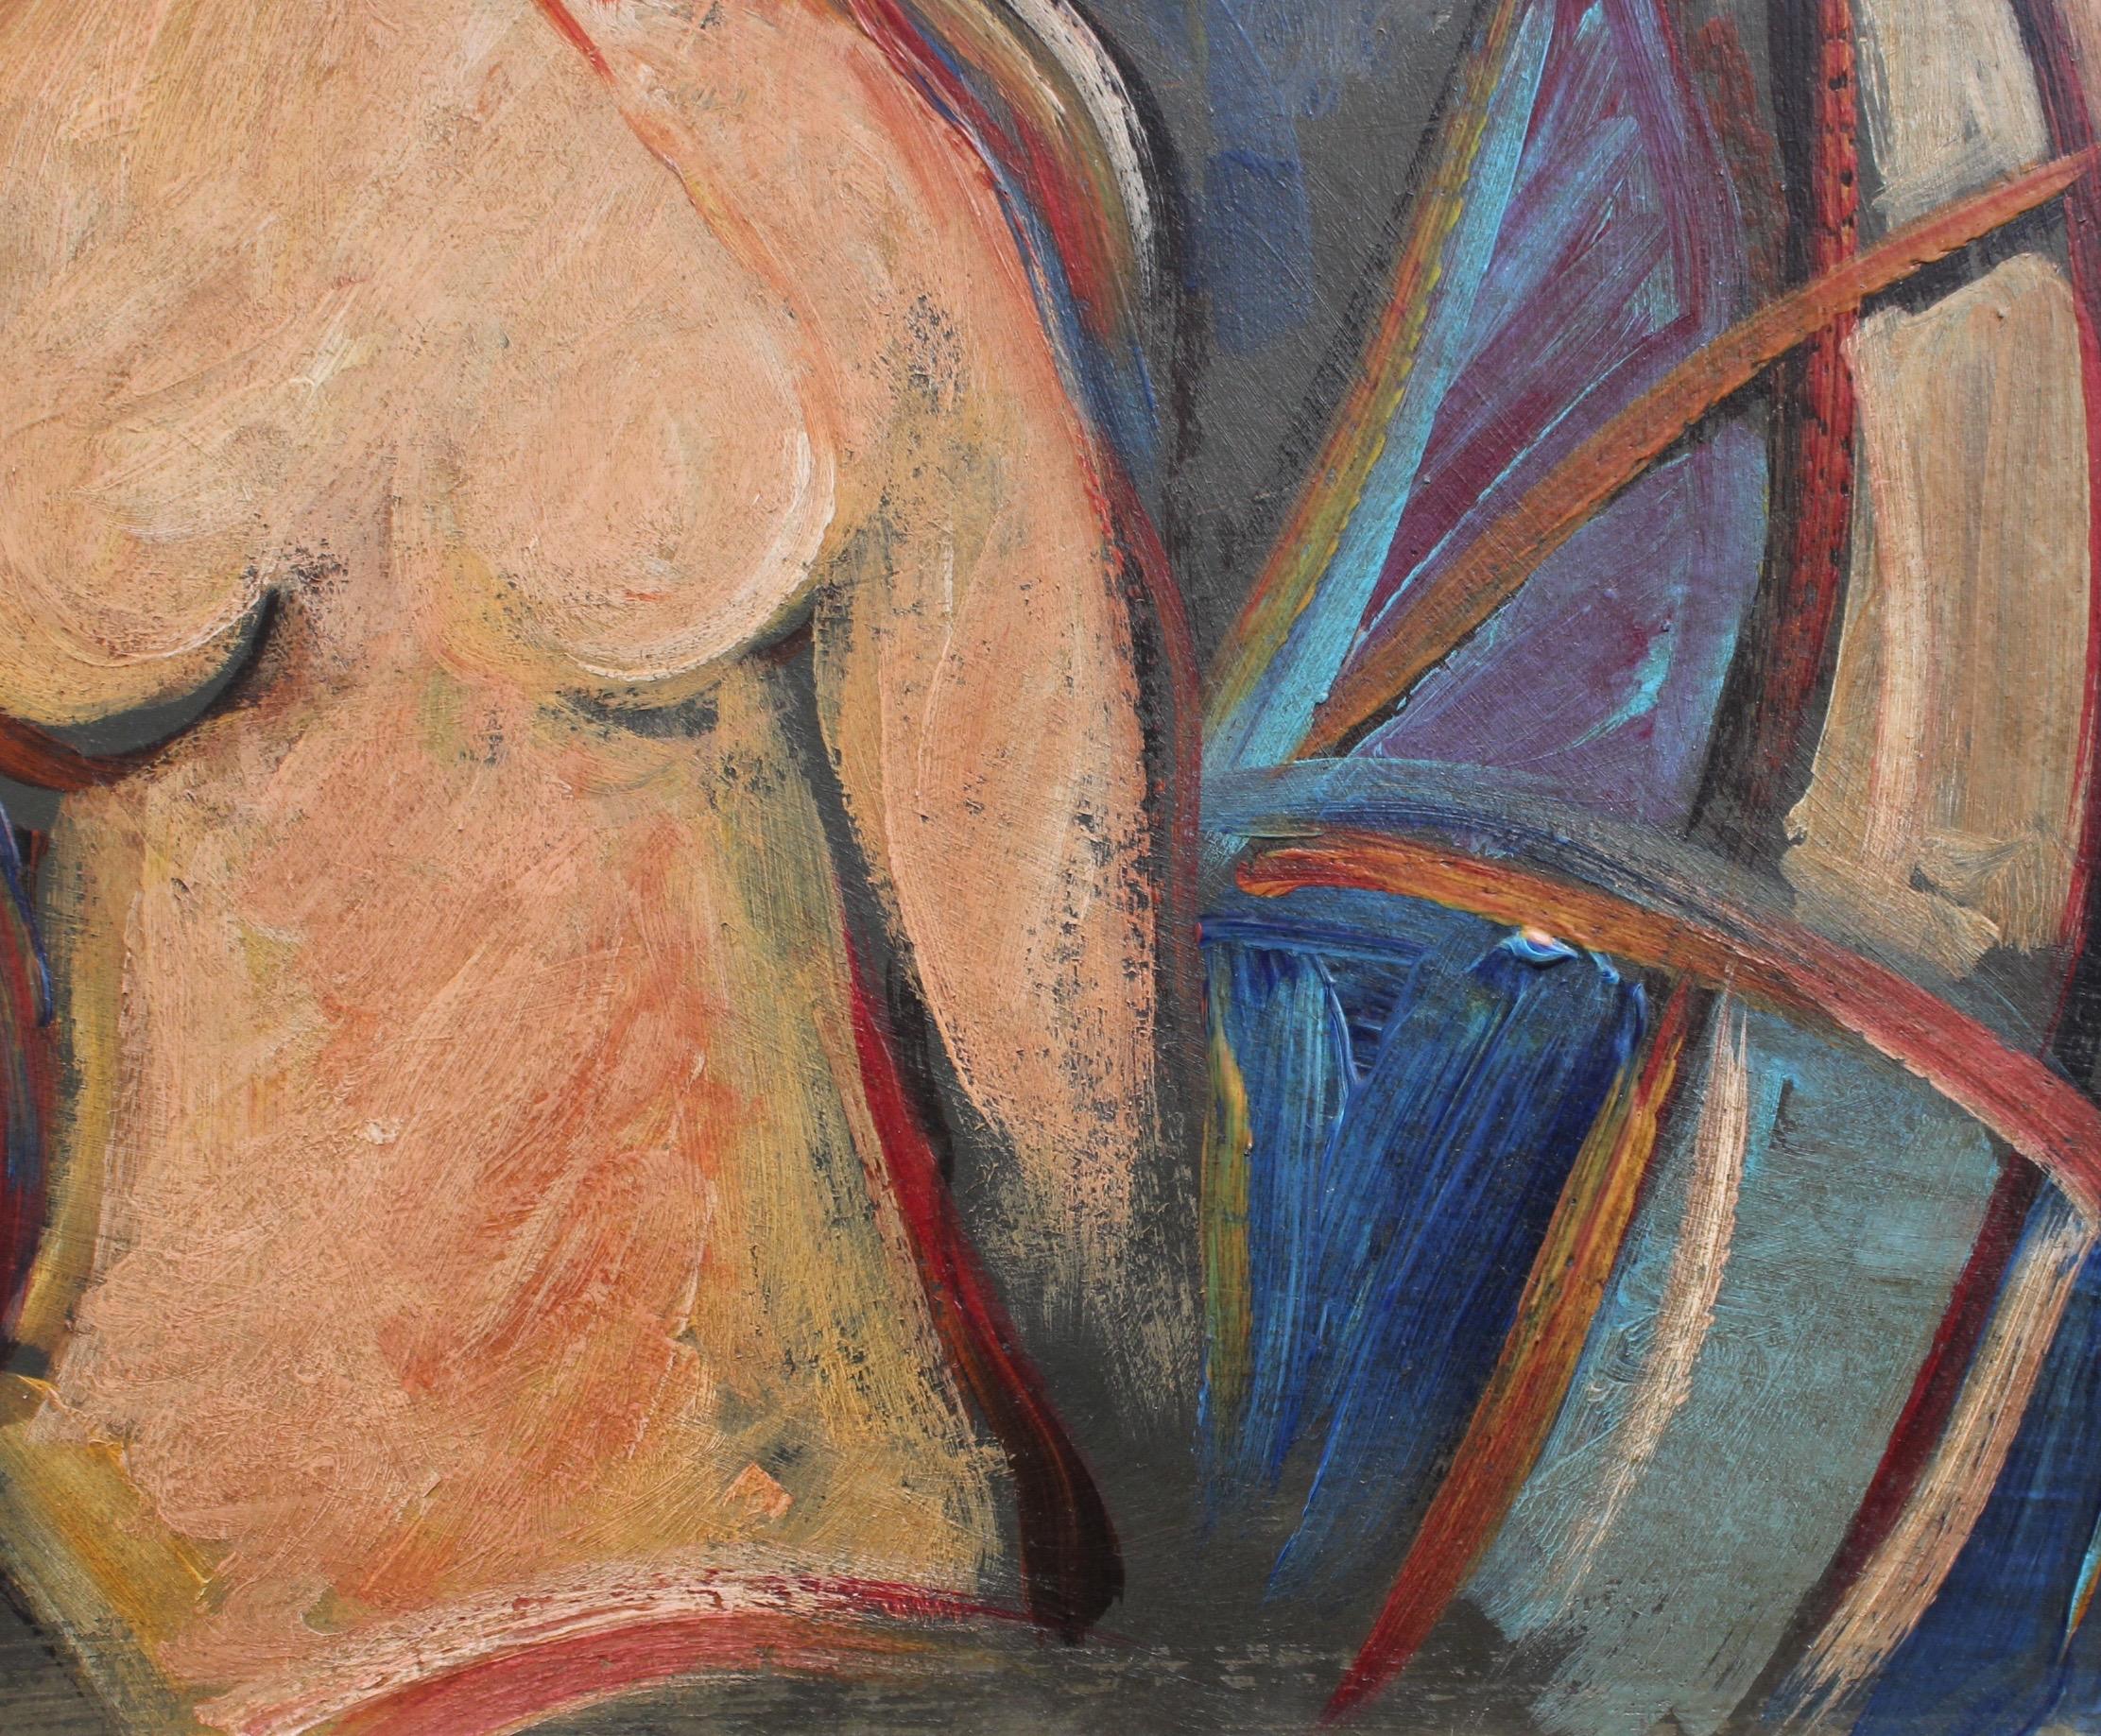 'Nudes in Repose' by STM, Mid-Century Modern Cubist Portrait Painting, Berlin 4